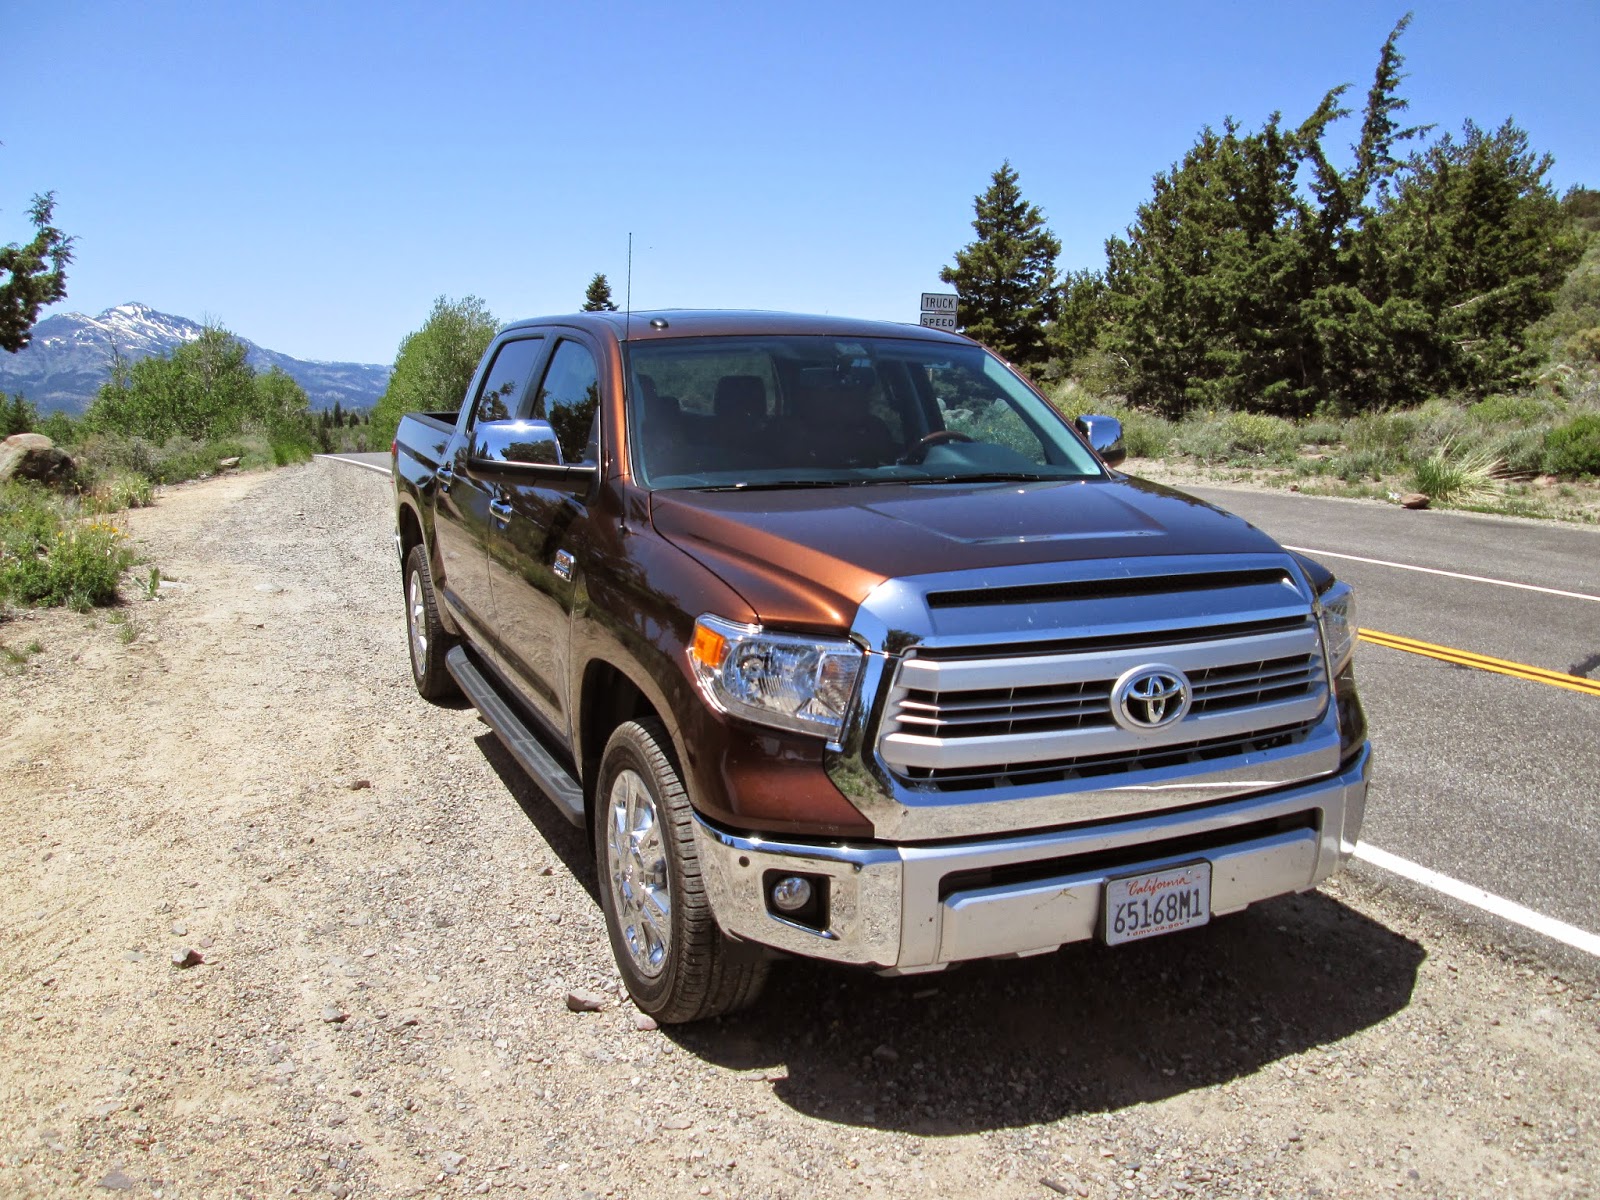 Where The 2014 Toyota Tundra 1794 Edition Is A Big Hit